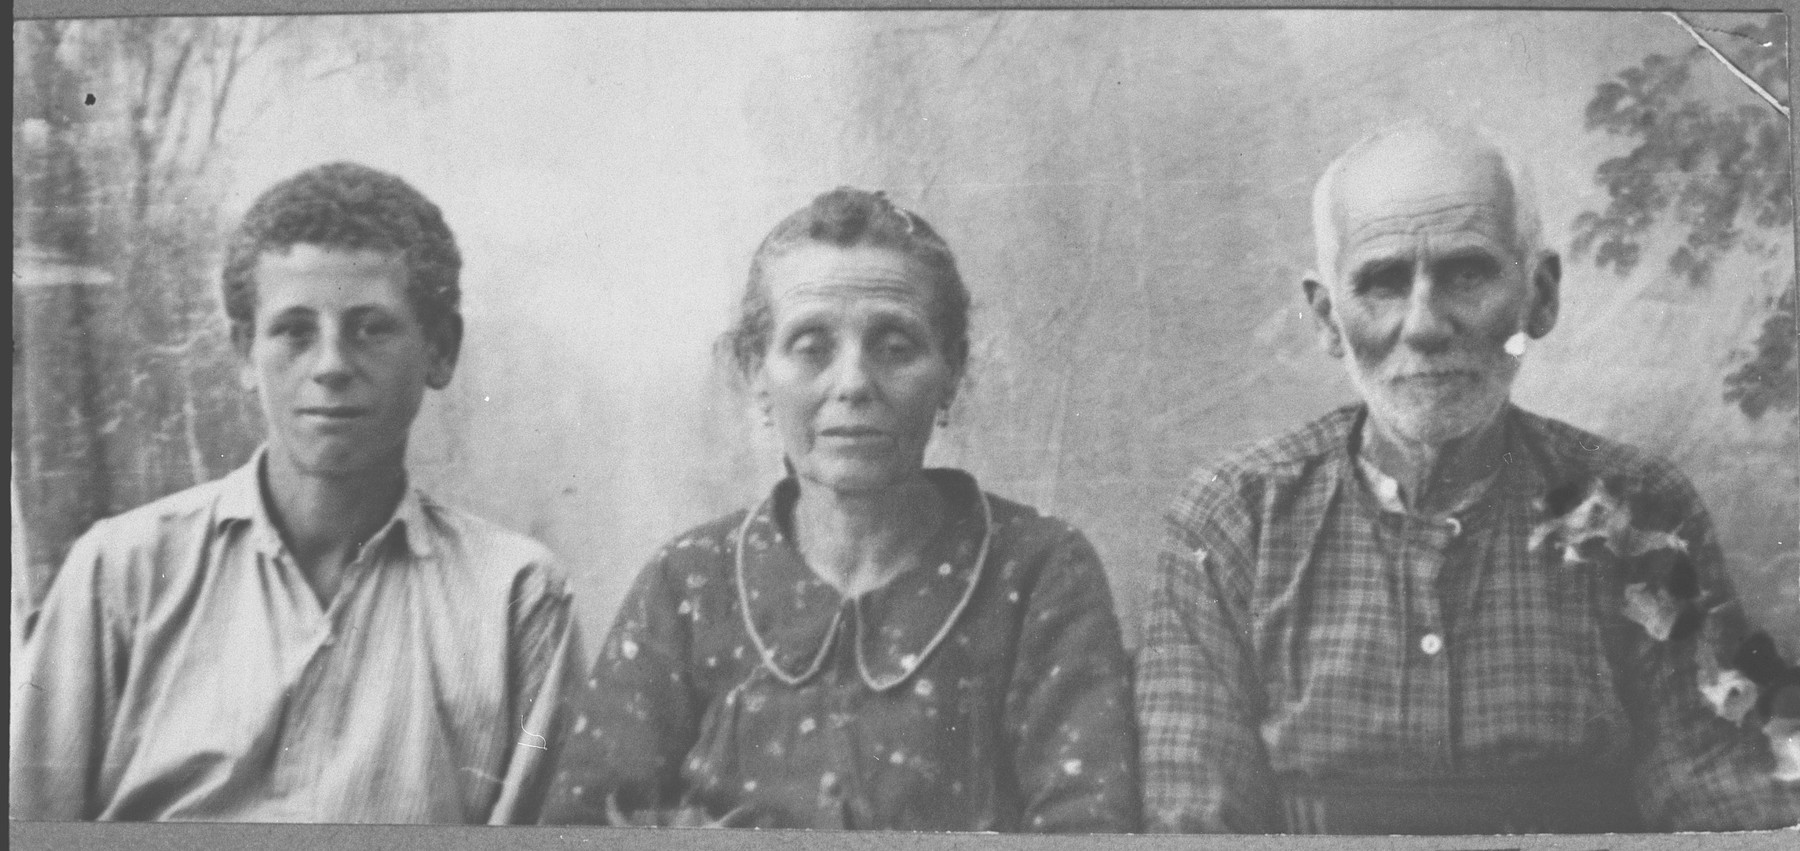 Portrait of Saba Ergas, his wife, Reina, and his son, Menachem.  Saba was a broommaker and Menachem, a student.  They lived at Karagoryeva 83 in Bitola.